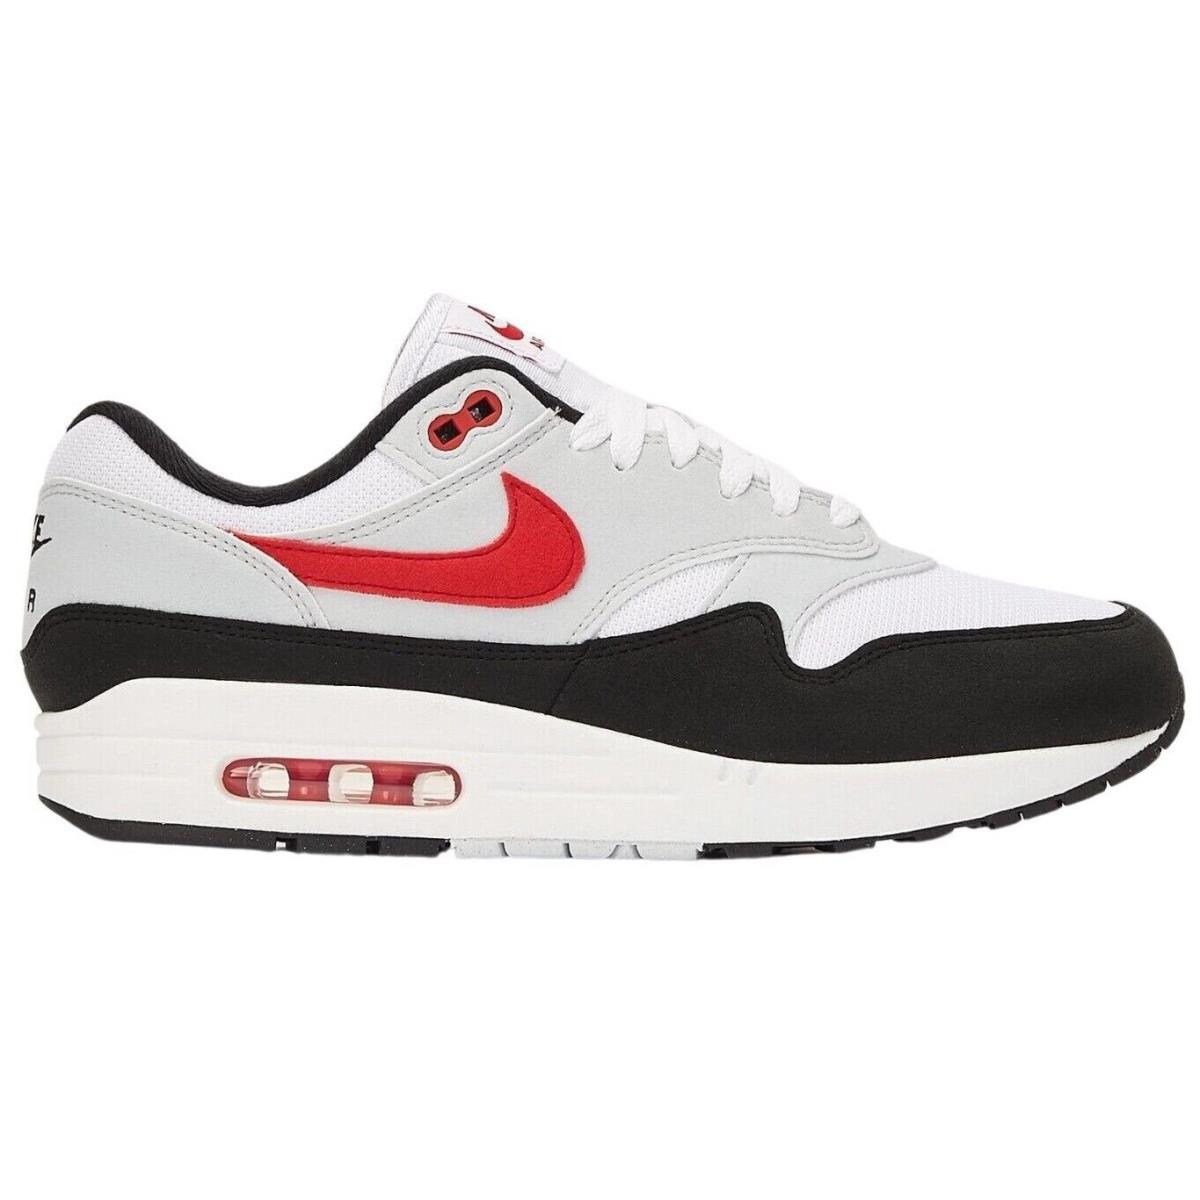 Nike Air Max 1 Men`s Casual Shoes All Colors US Sizes 7-14 White / University Red / Pure Platinum / Black